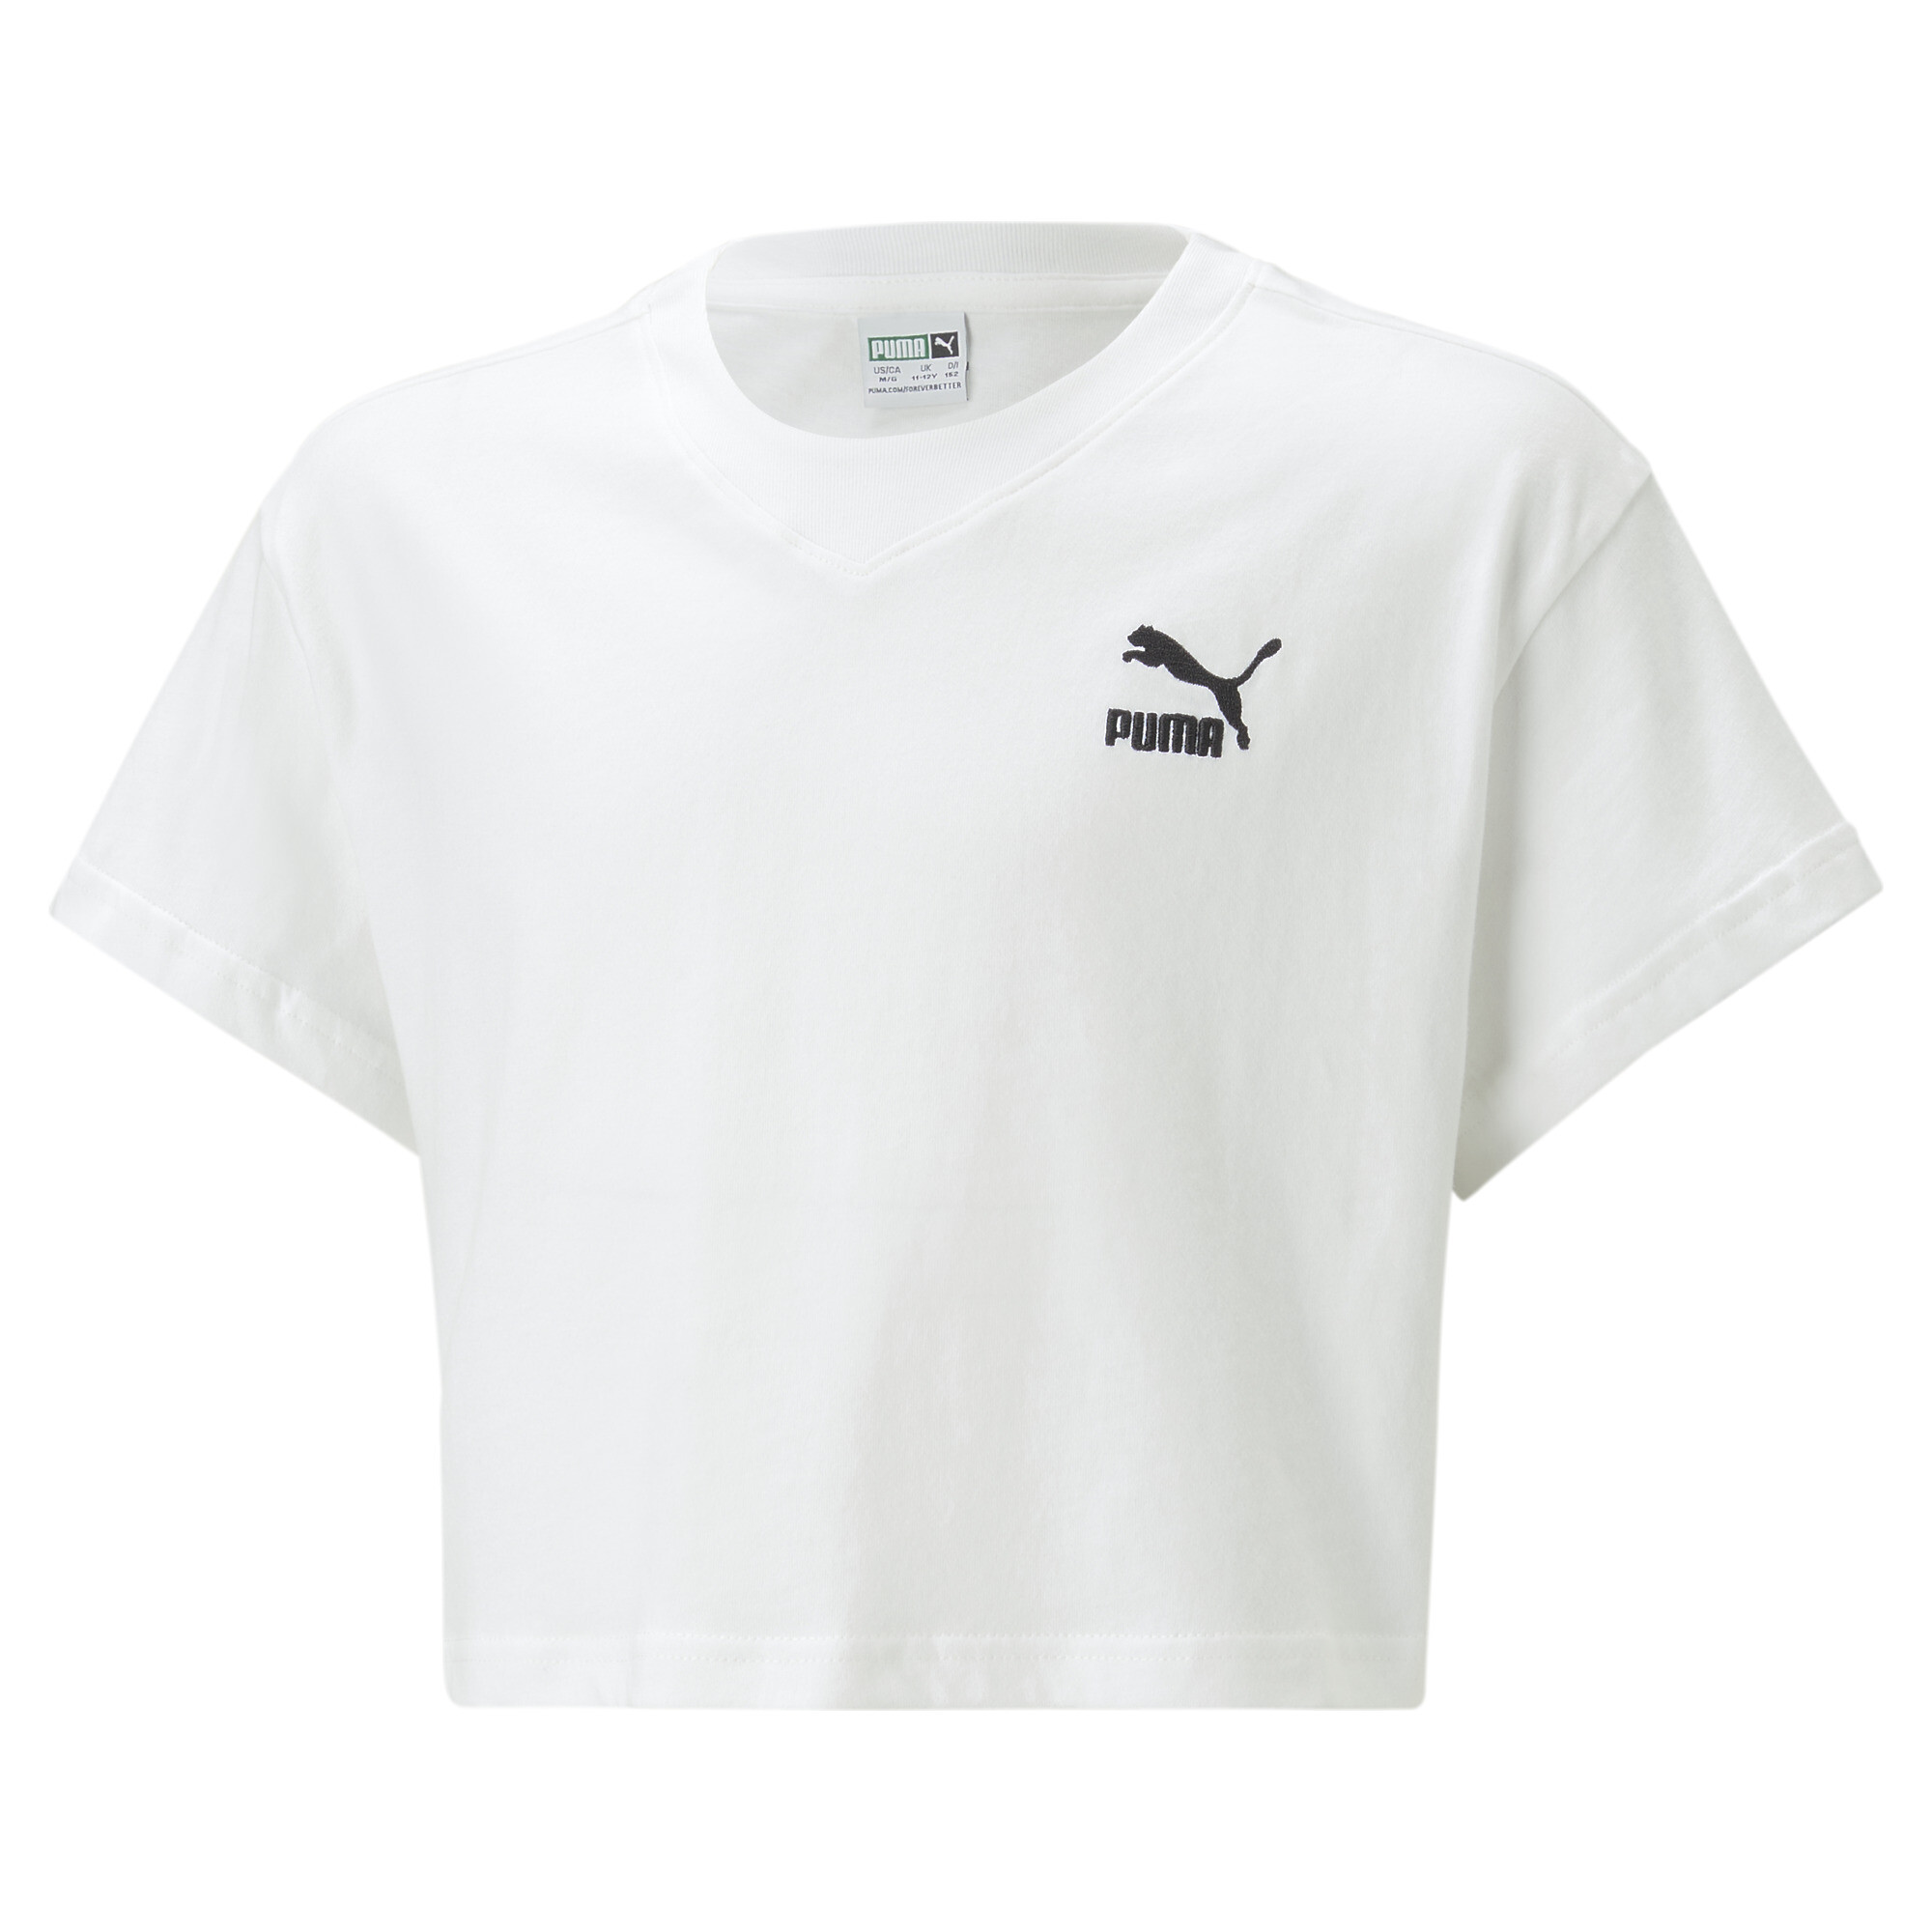 PUMA Classics T-Shirt In 20 - White, Size 15-16 Youth